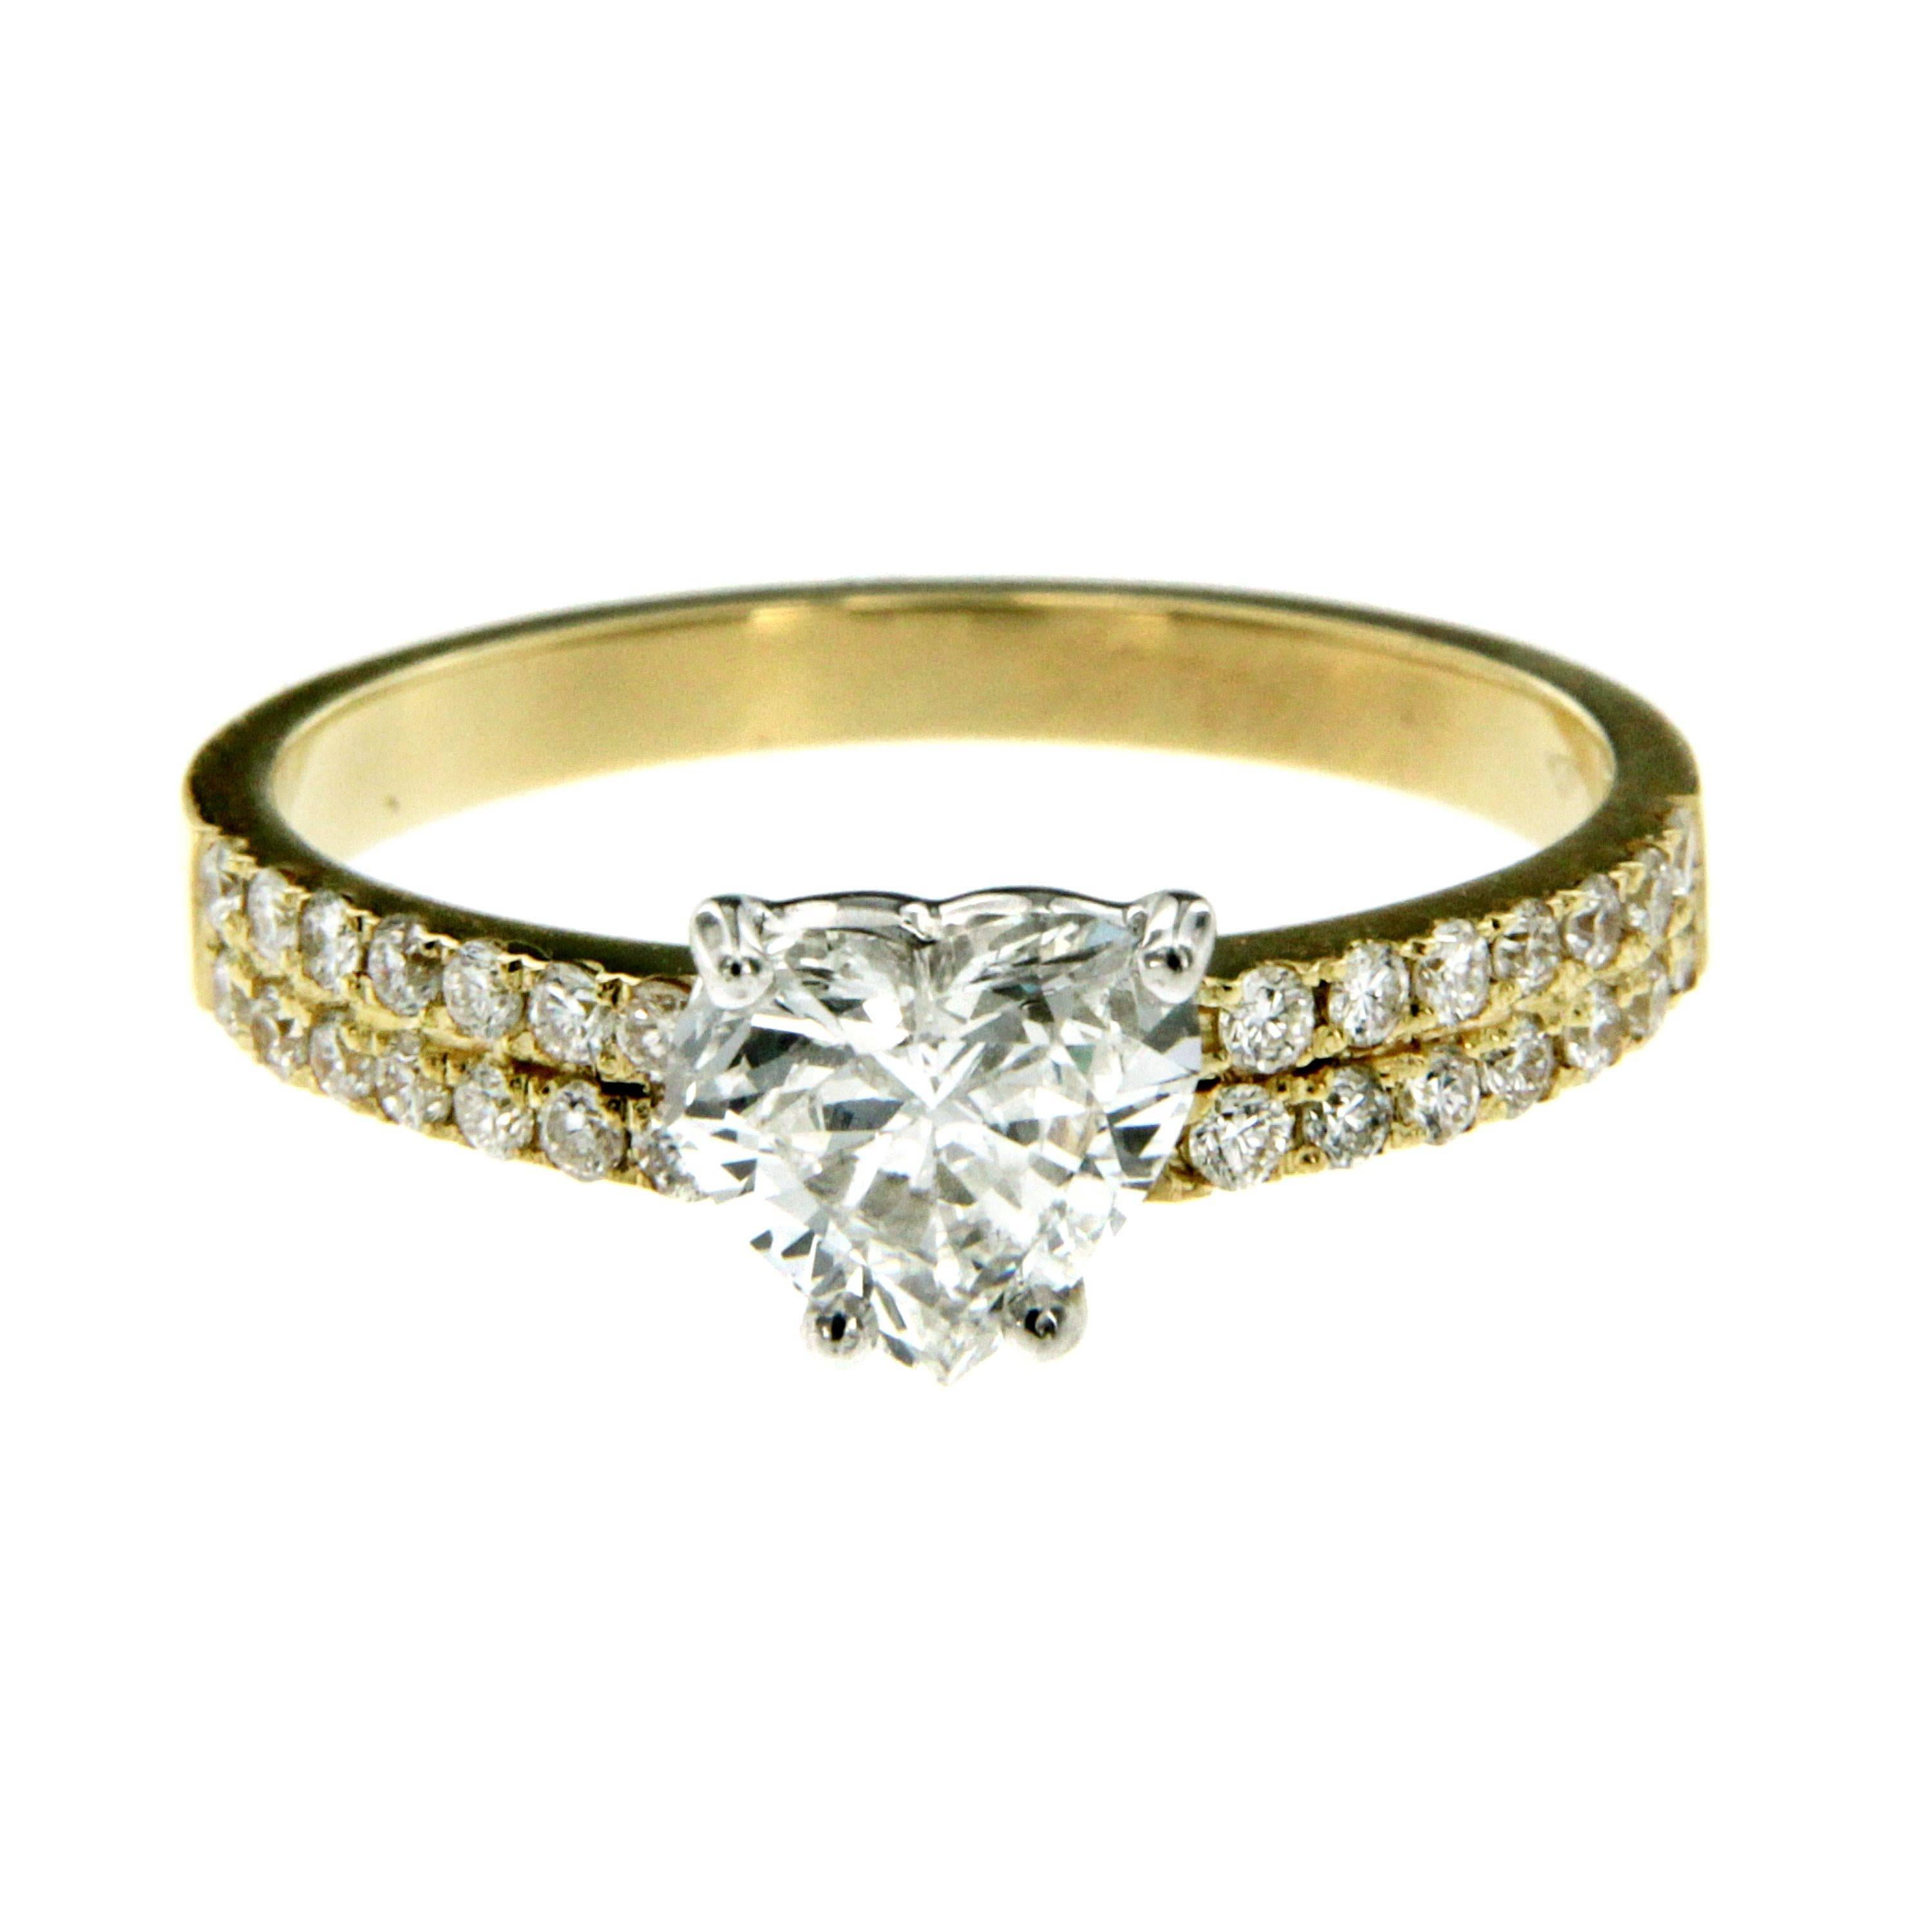 Beautiful and fashion ring hand made in 18k yellow gold
The center diamond in this ring is a 0.80CT GIA Certified Heart Shaped Diamond with I color, Vvs2 clarity. The elegant ring's shank is adorned with 4 lines of  Round Brilliant Cut Diamonds,